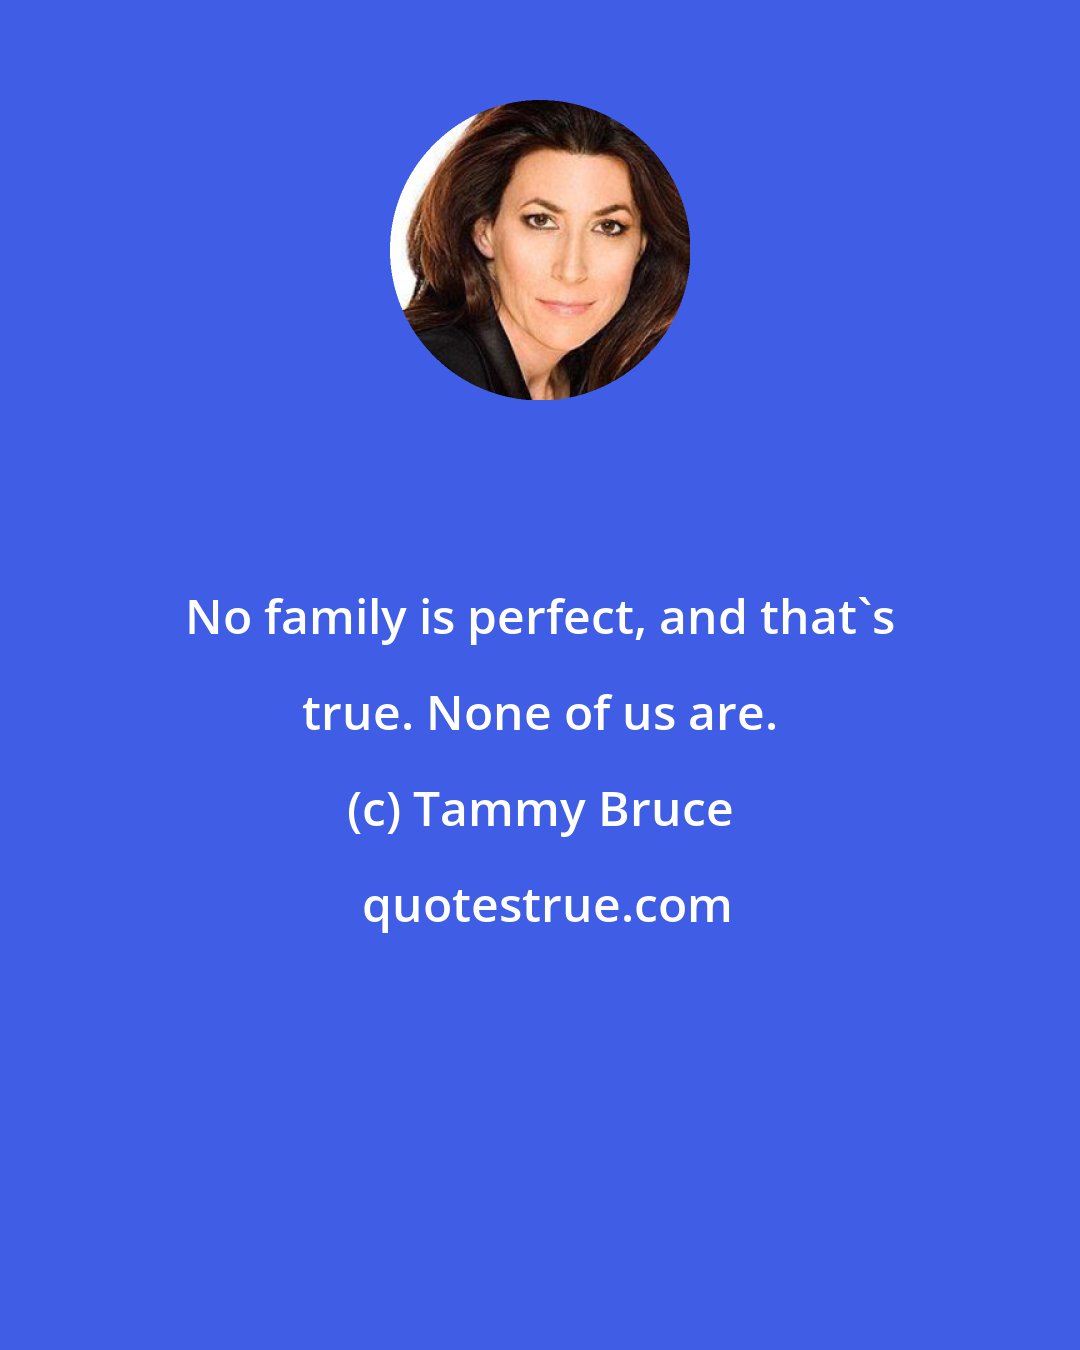 Tammy Bruce: No family is perfect, and that's true. None of us are.